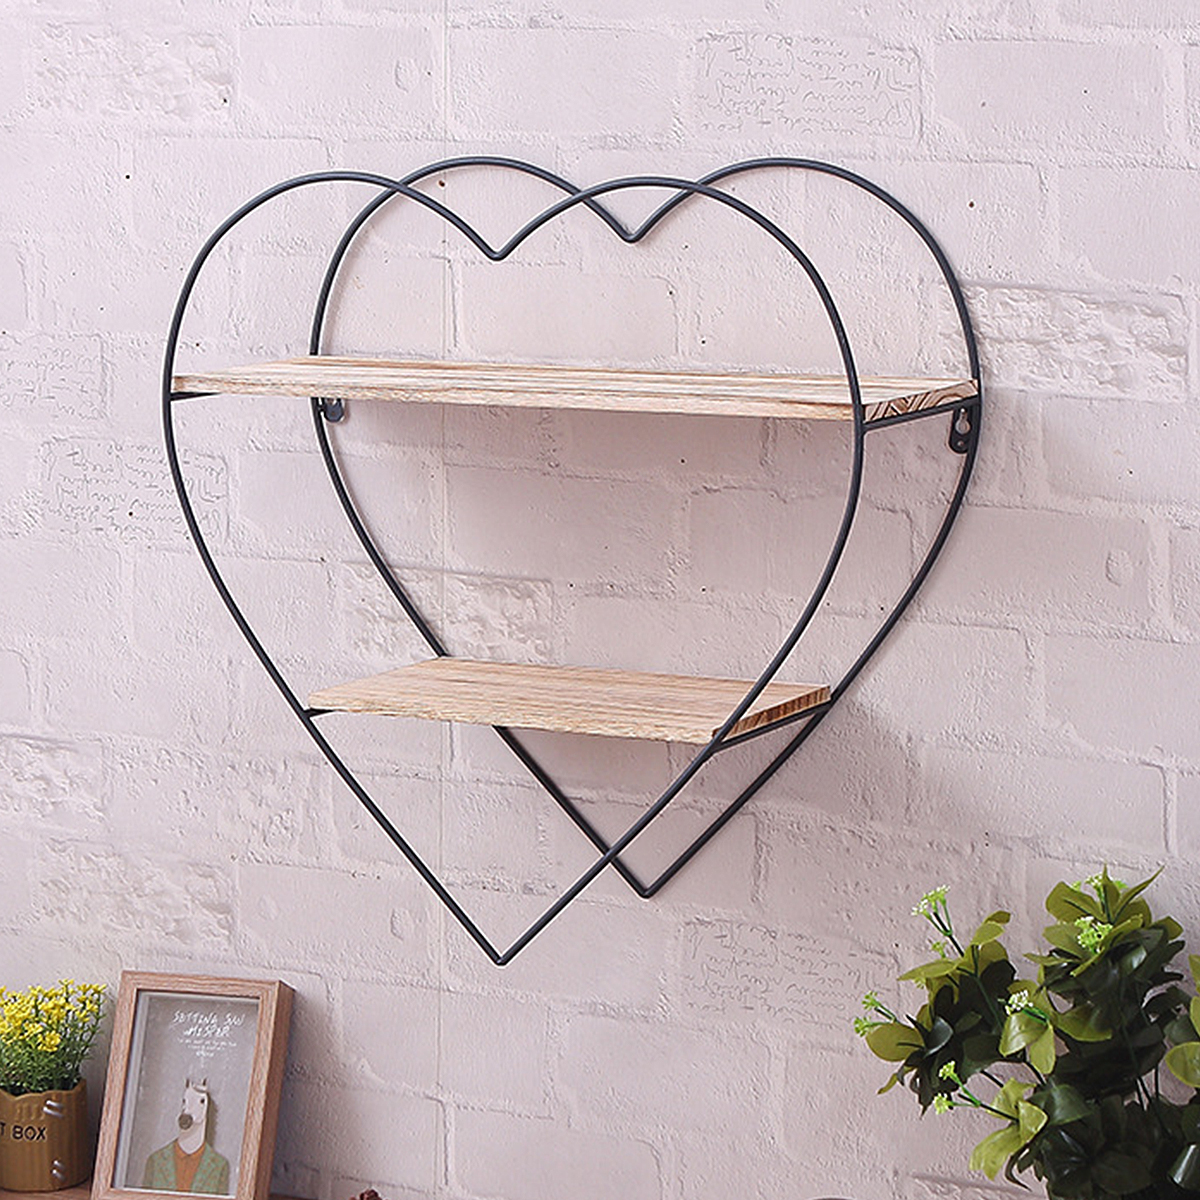 Heart-shaped-Wooden-Wall-Shelf-2-Layers-Vintage-Storage-Wall-Mounted-Display-Floating-Rack-for-Kitch-1785937-8